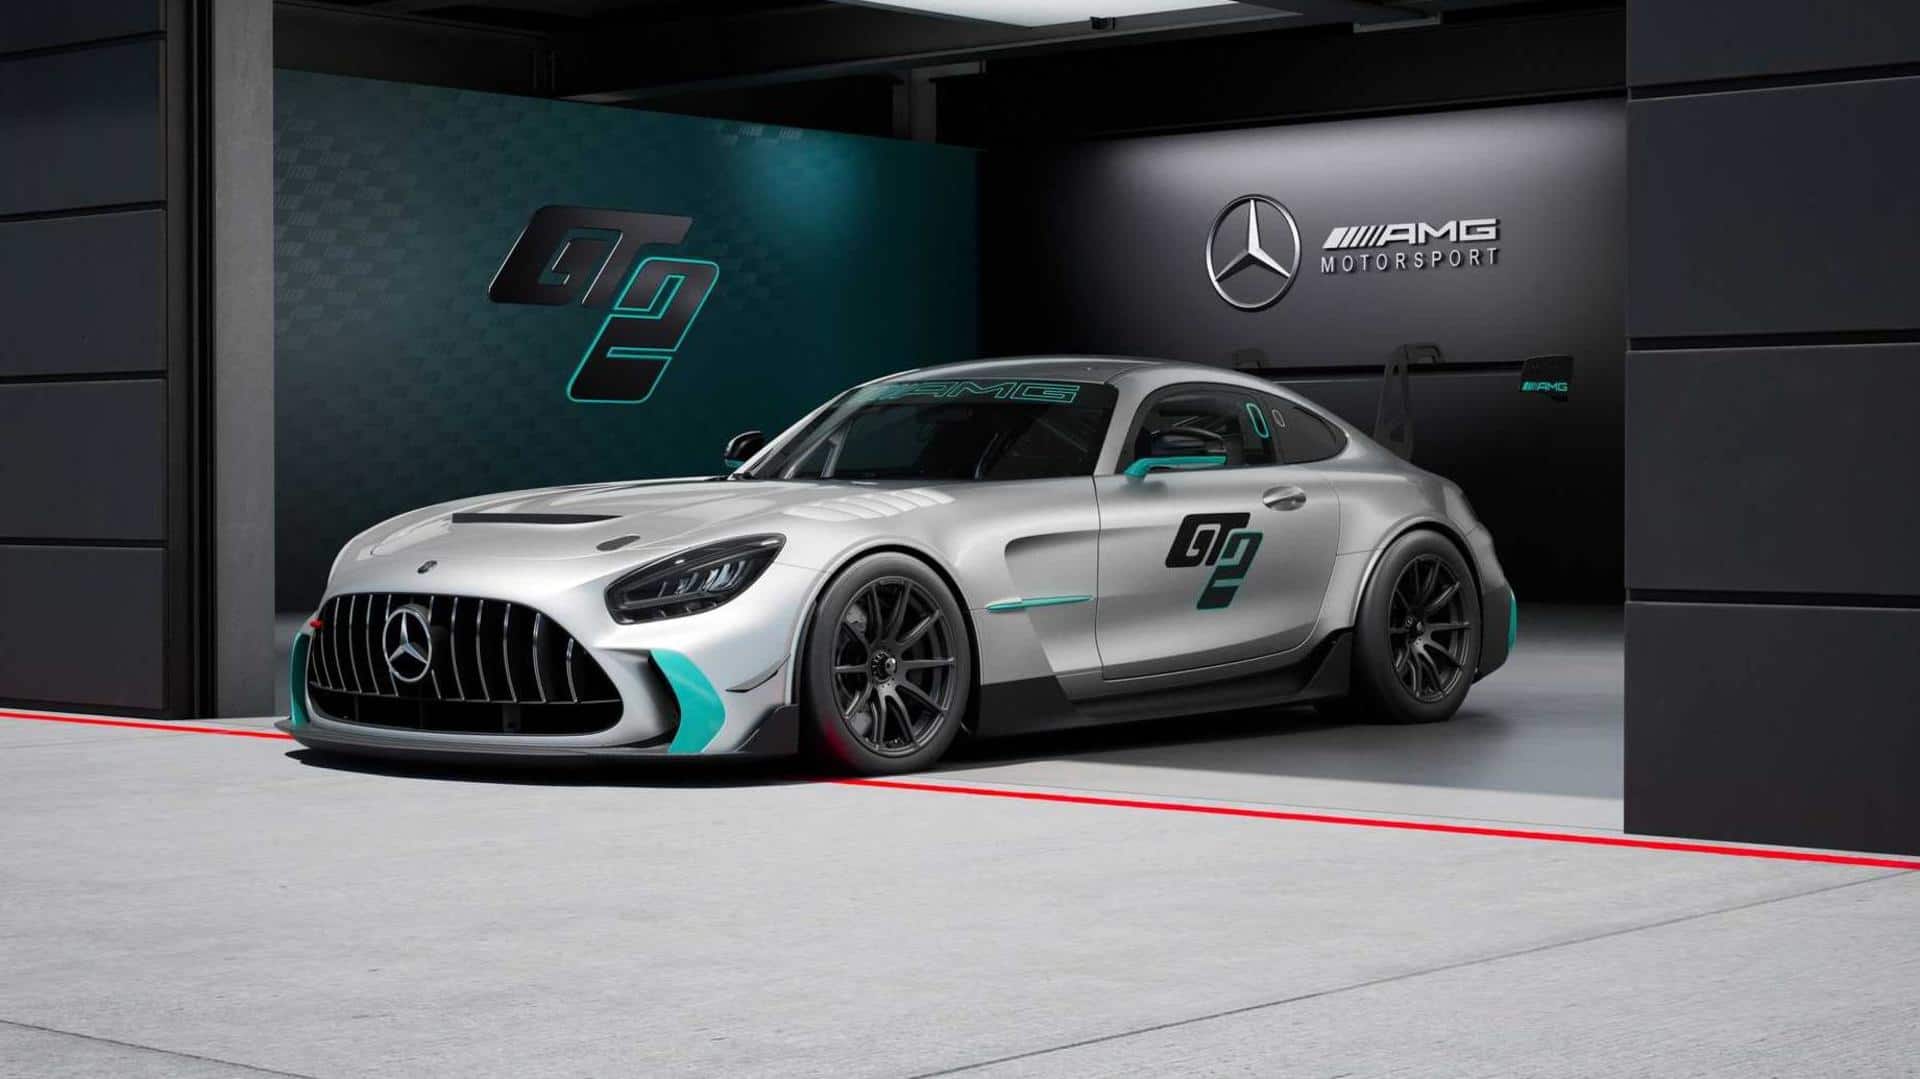 Mercedes-AMG GT2 race car revealed with a 707hp, V8 engine